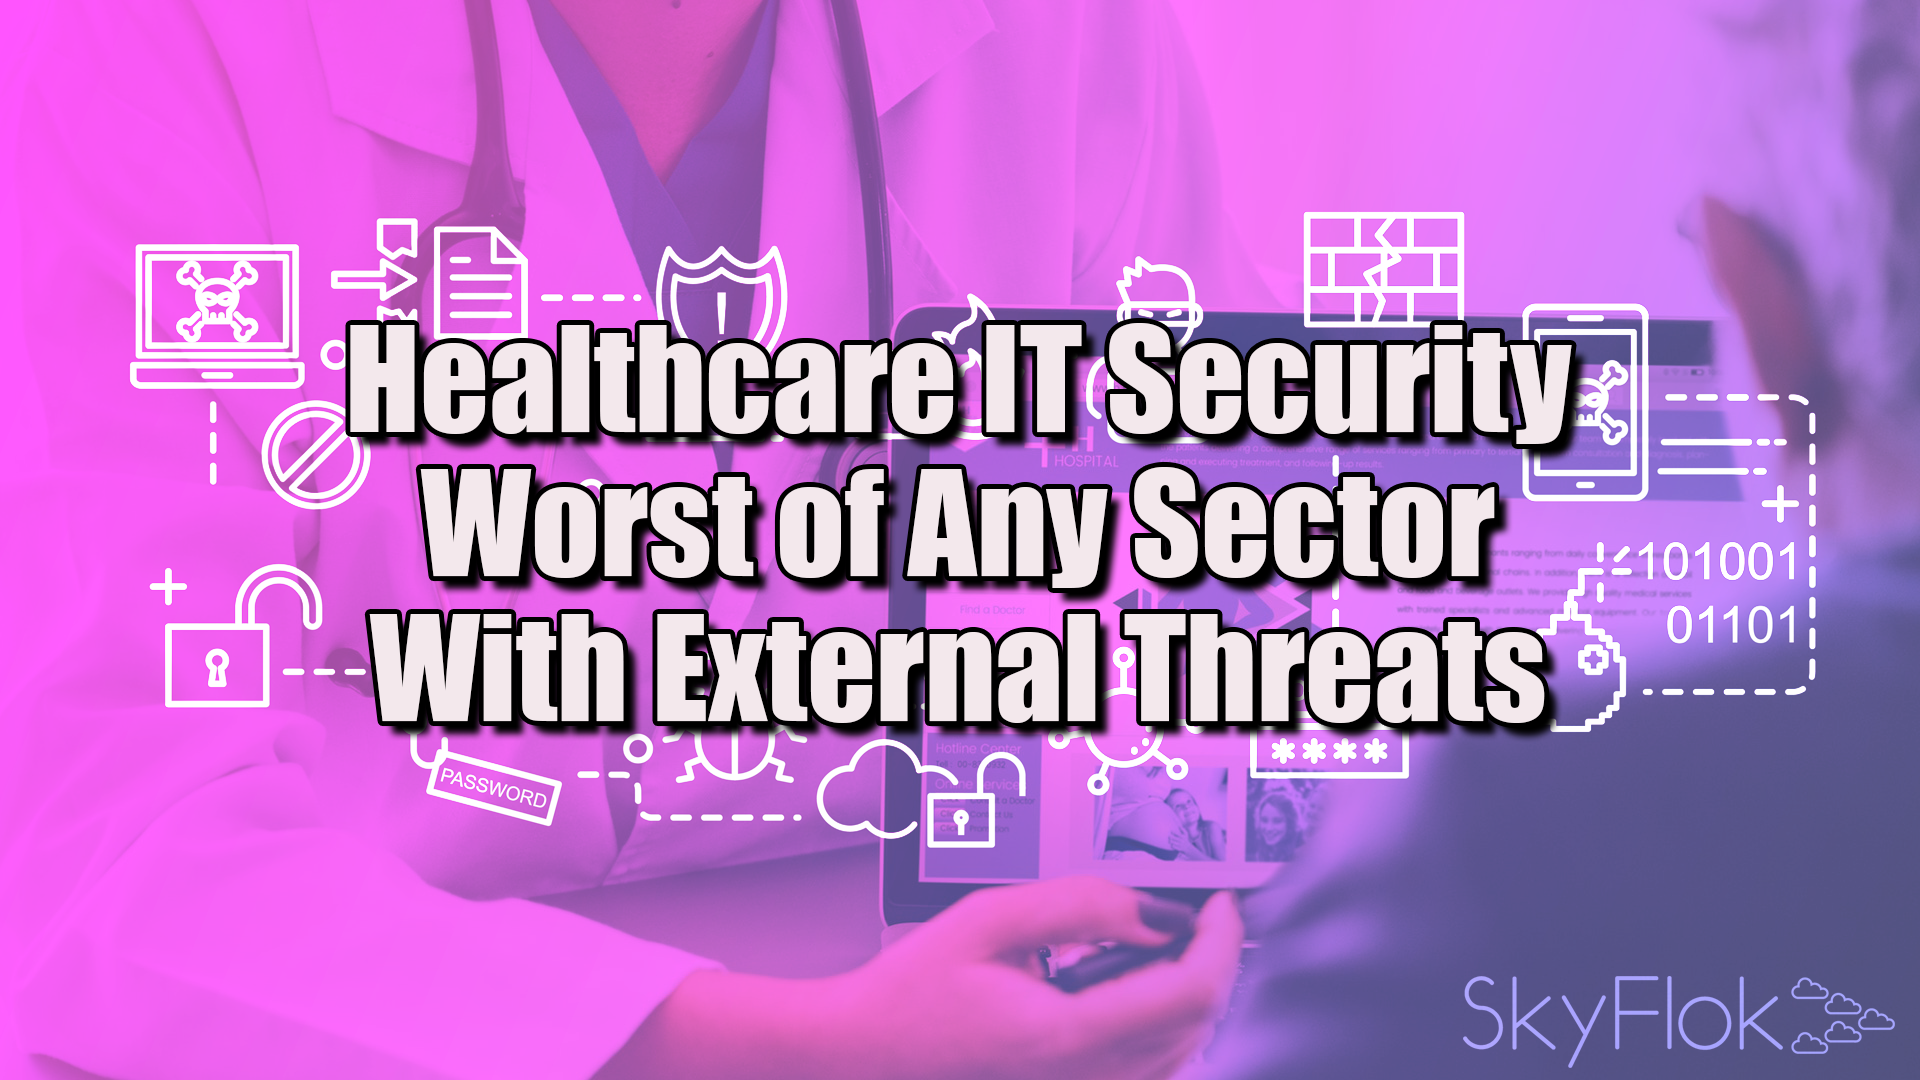 You are currently viewing Healthcare IT Security Worst of Any Sector With External Threats